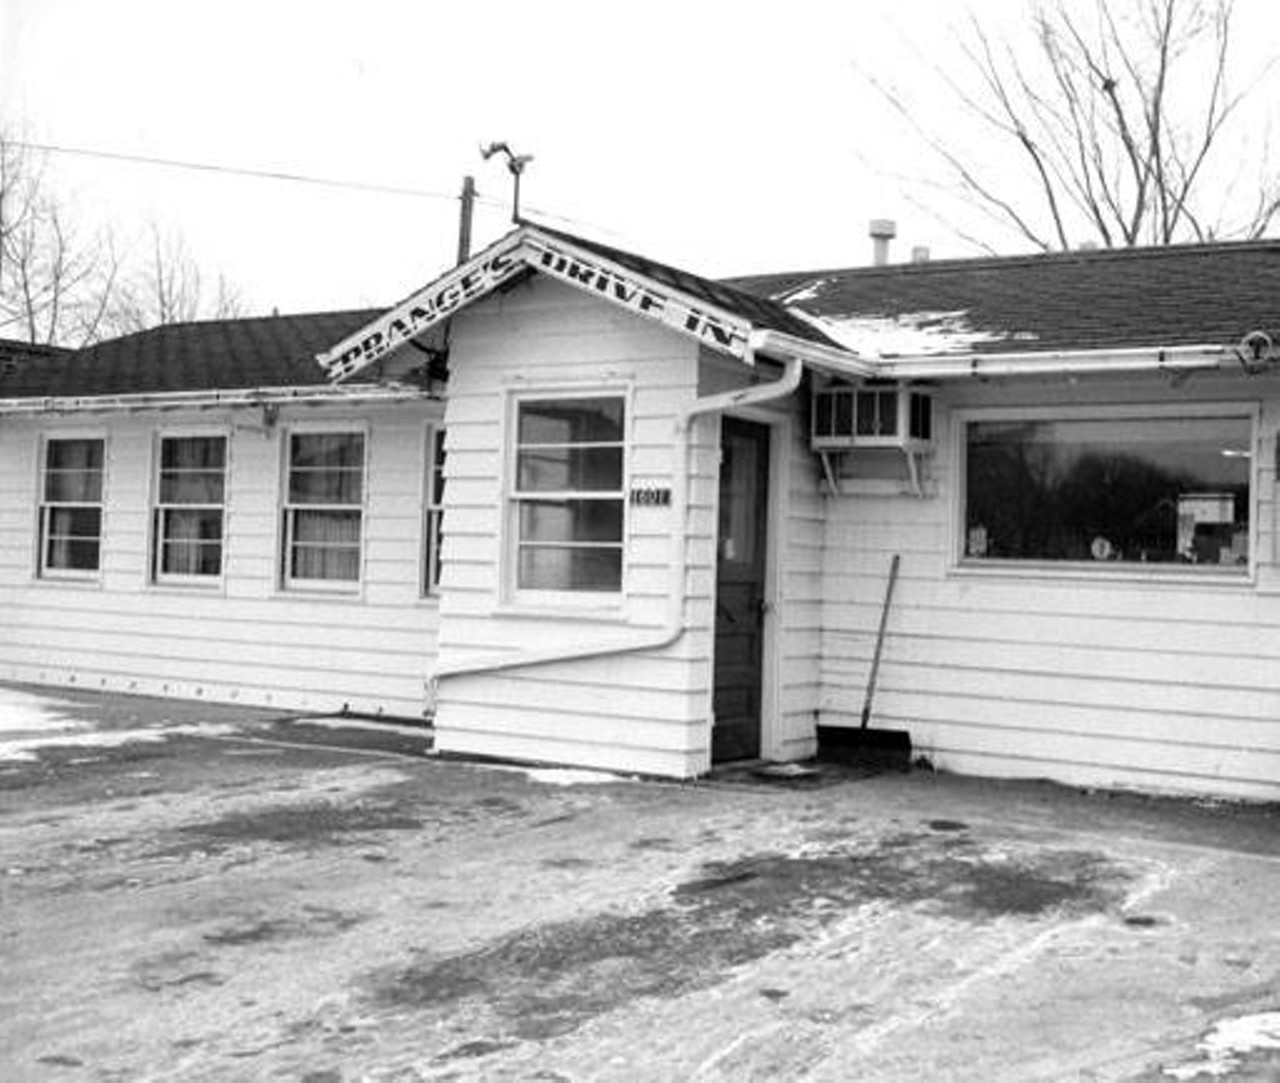 Melvin Prange's drive-in restaurant on Hilliard Rd. just south of Madison Ave. c. 1965